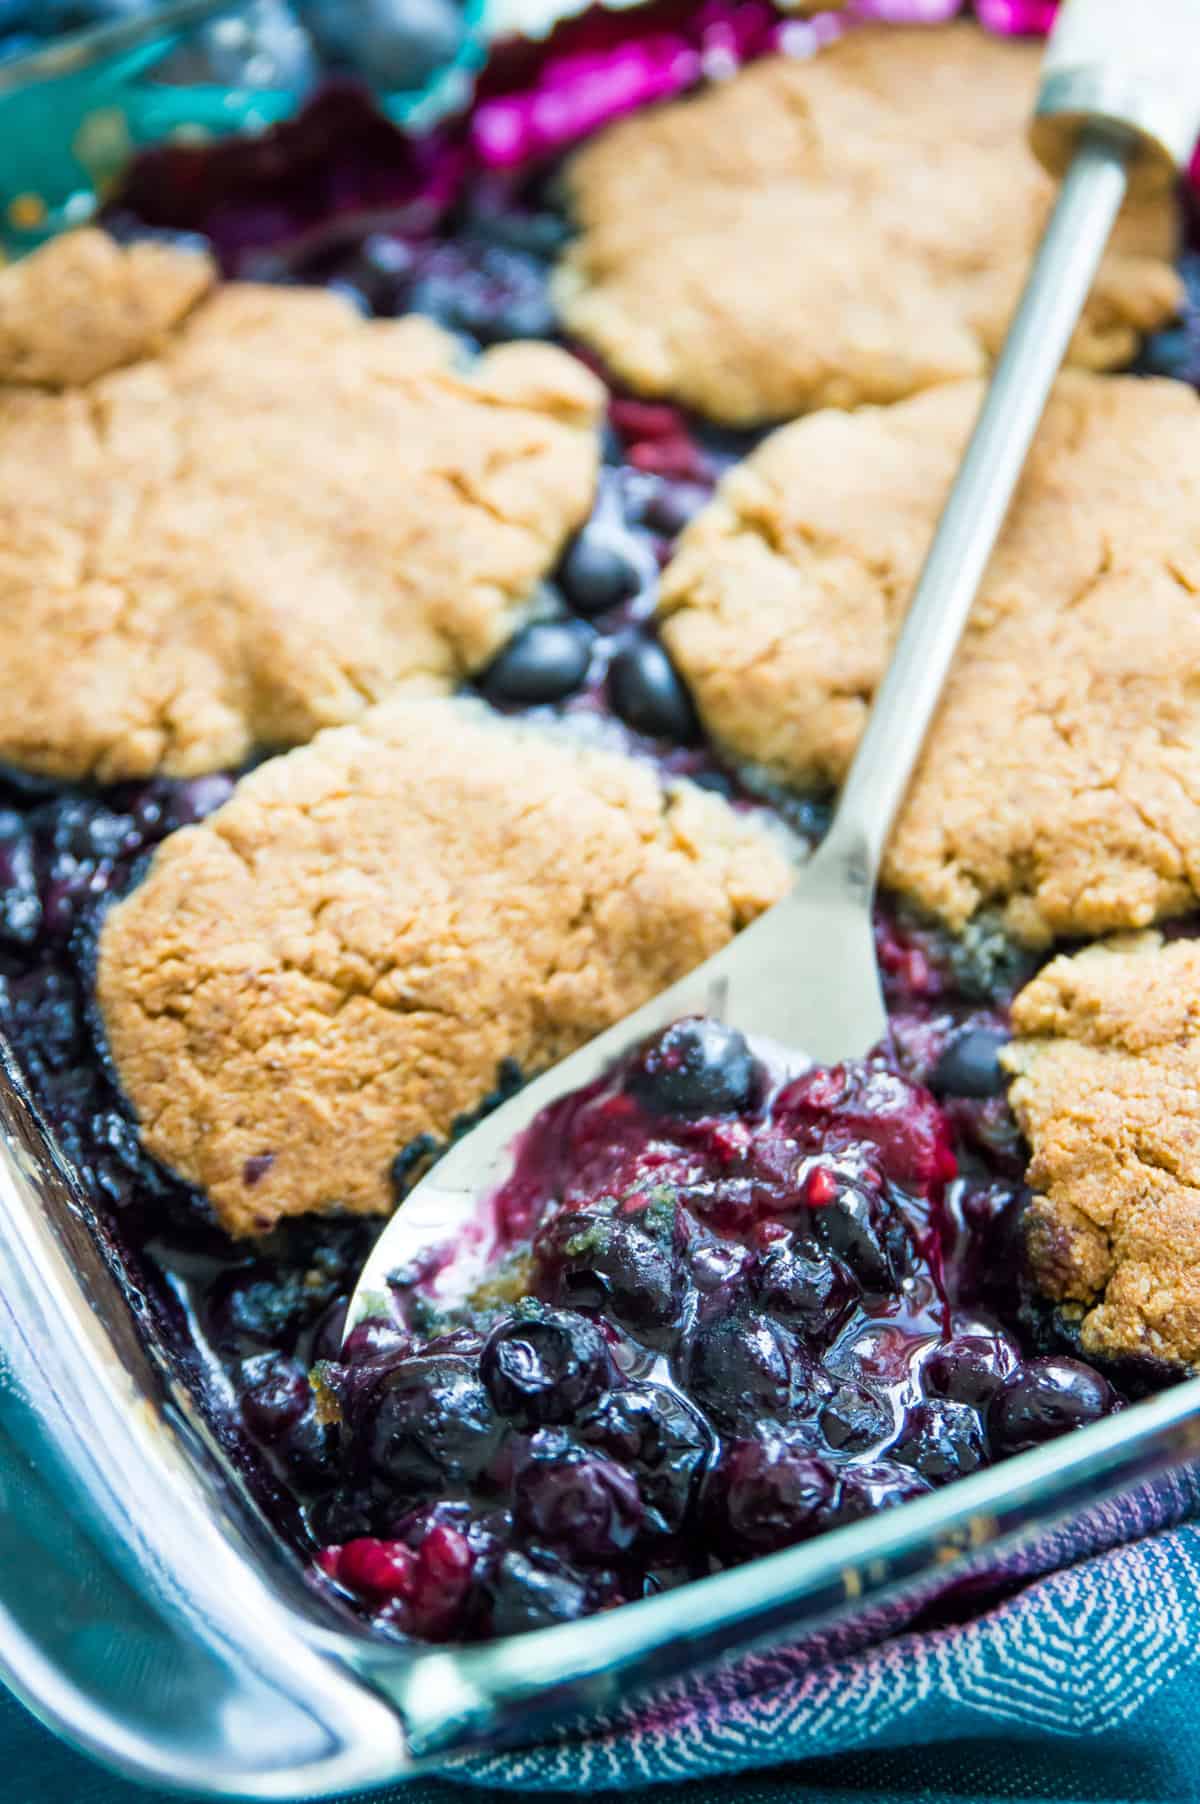 A pan of blueberry raspberry cobbler with a serving spoon in it.